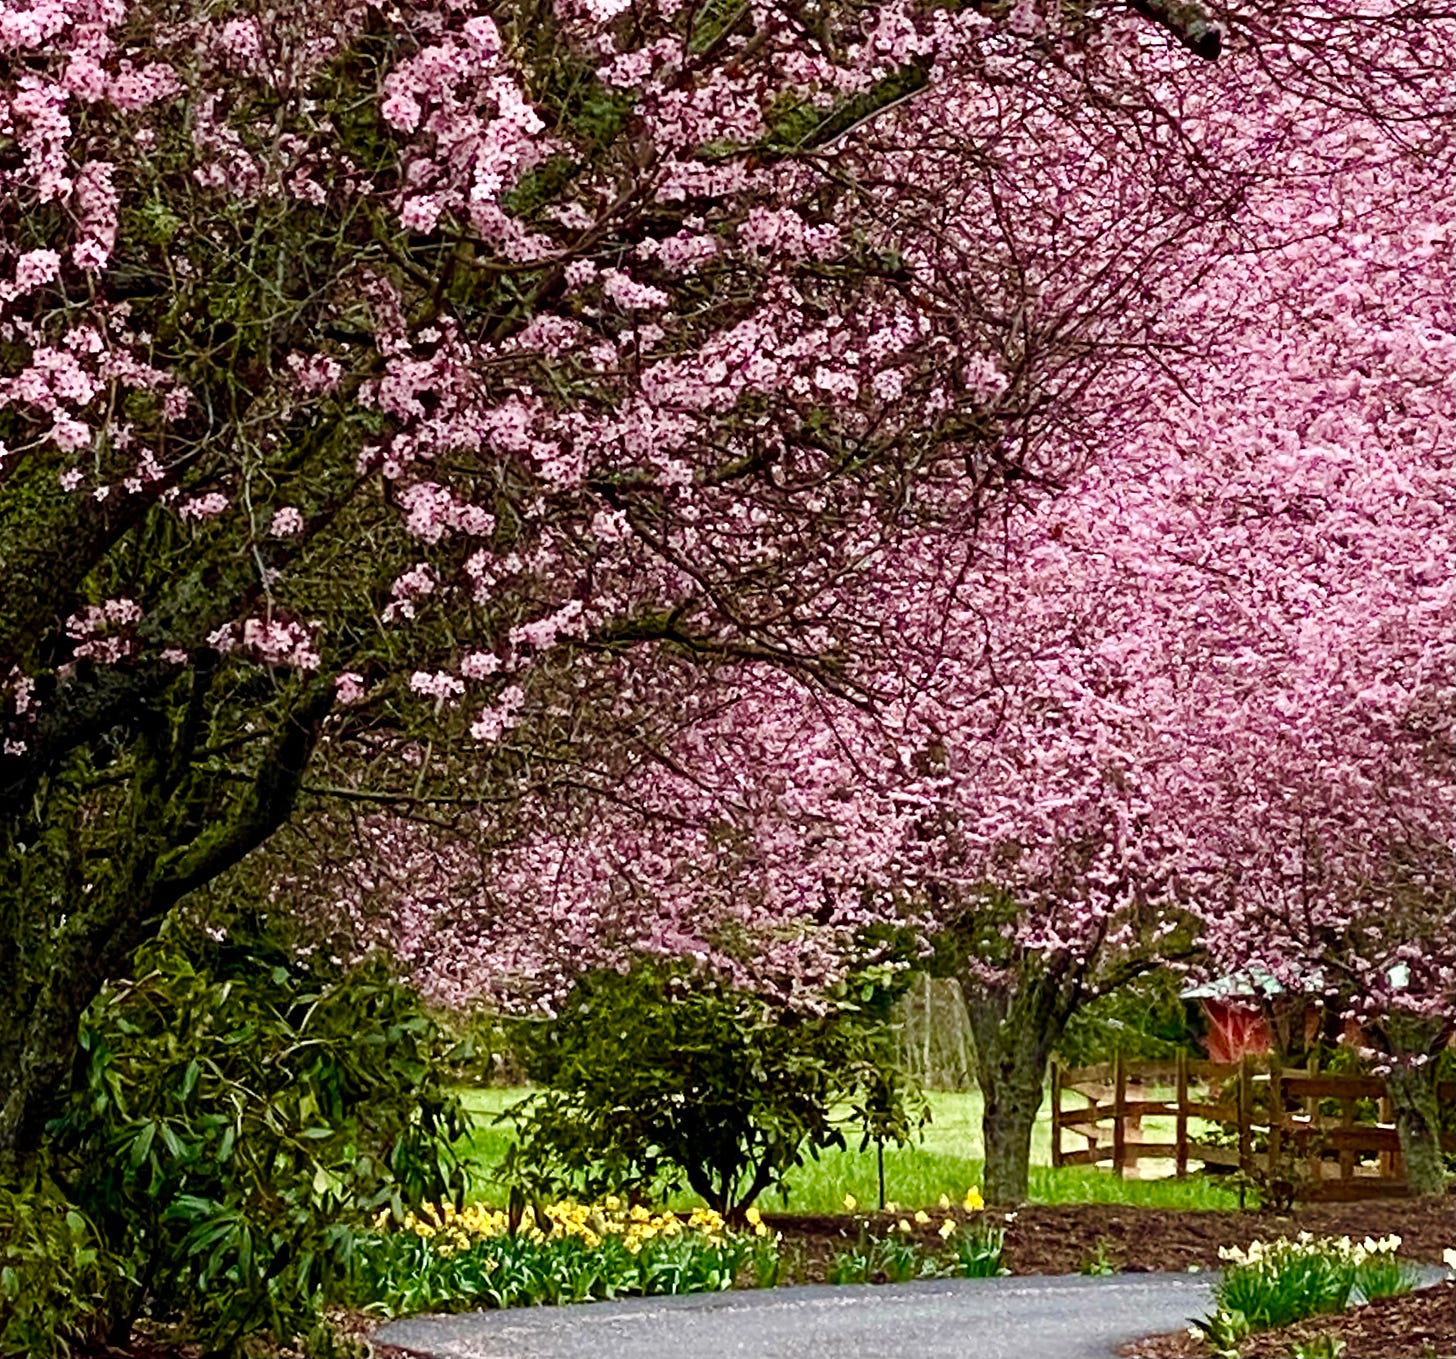 Pink blossoming trees